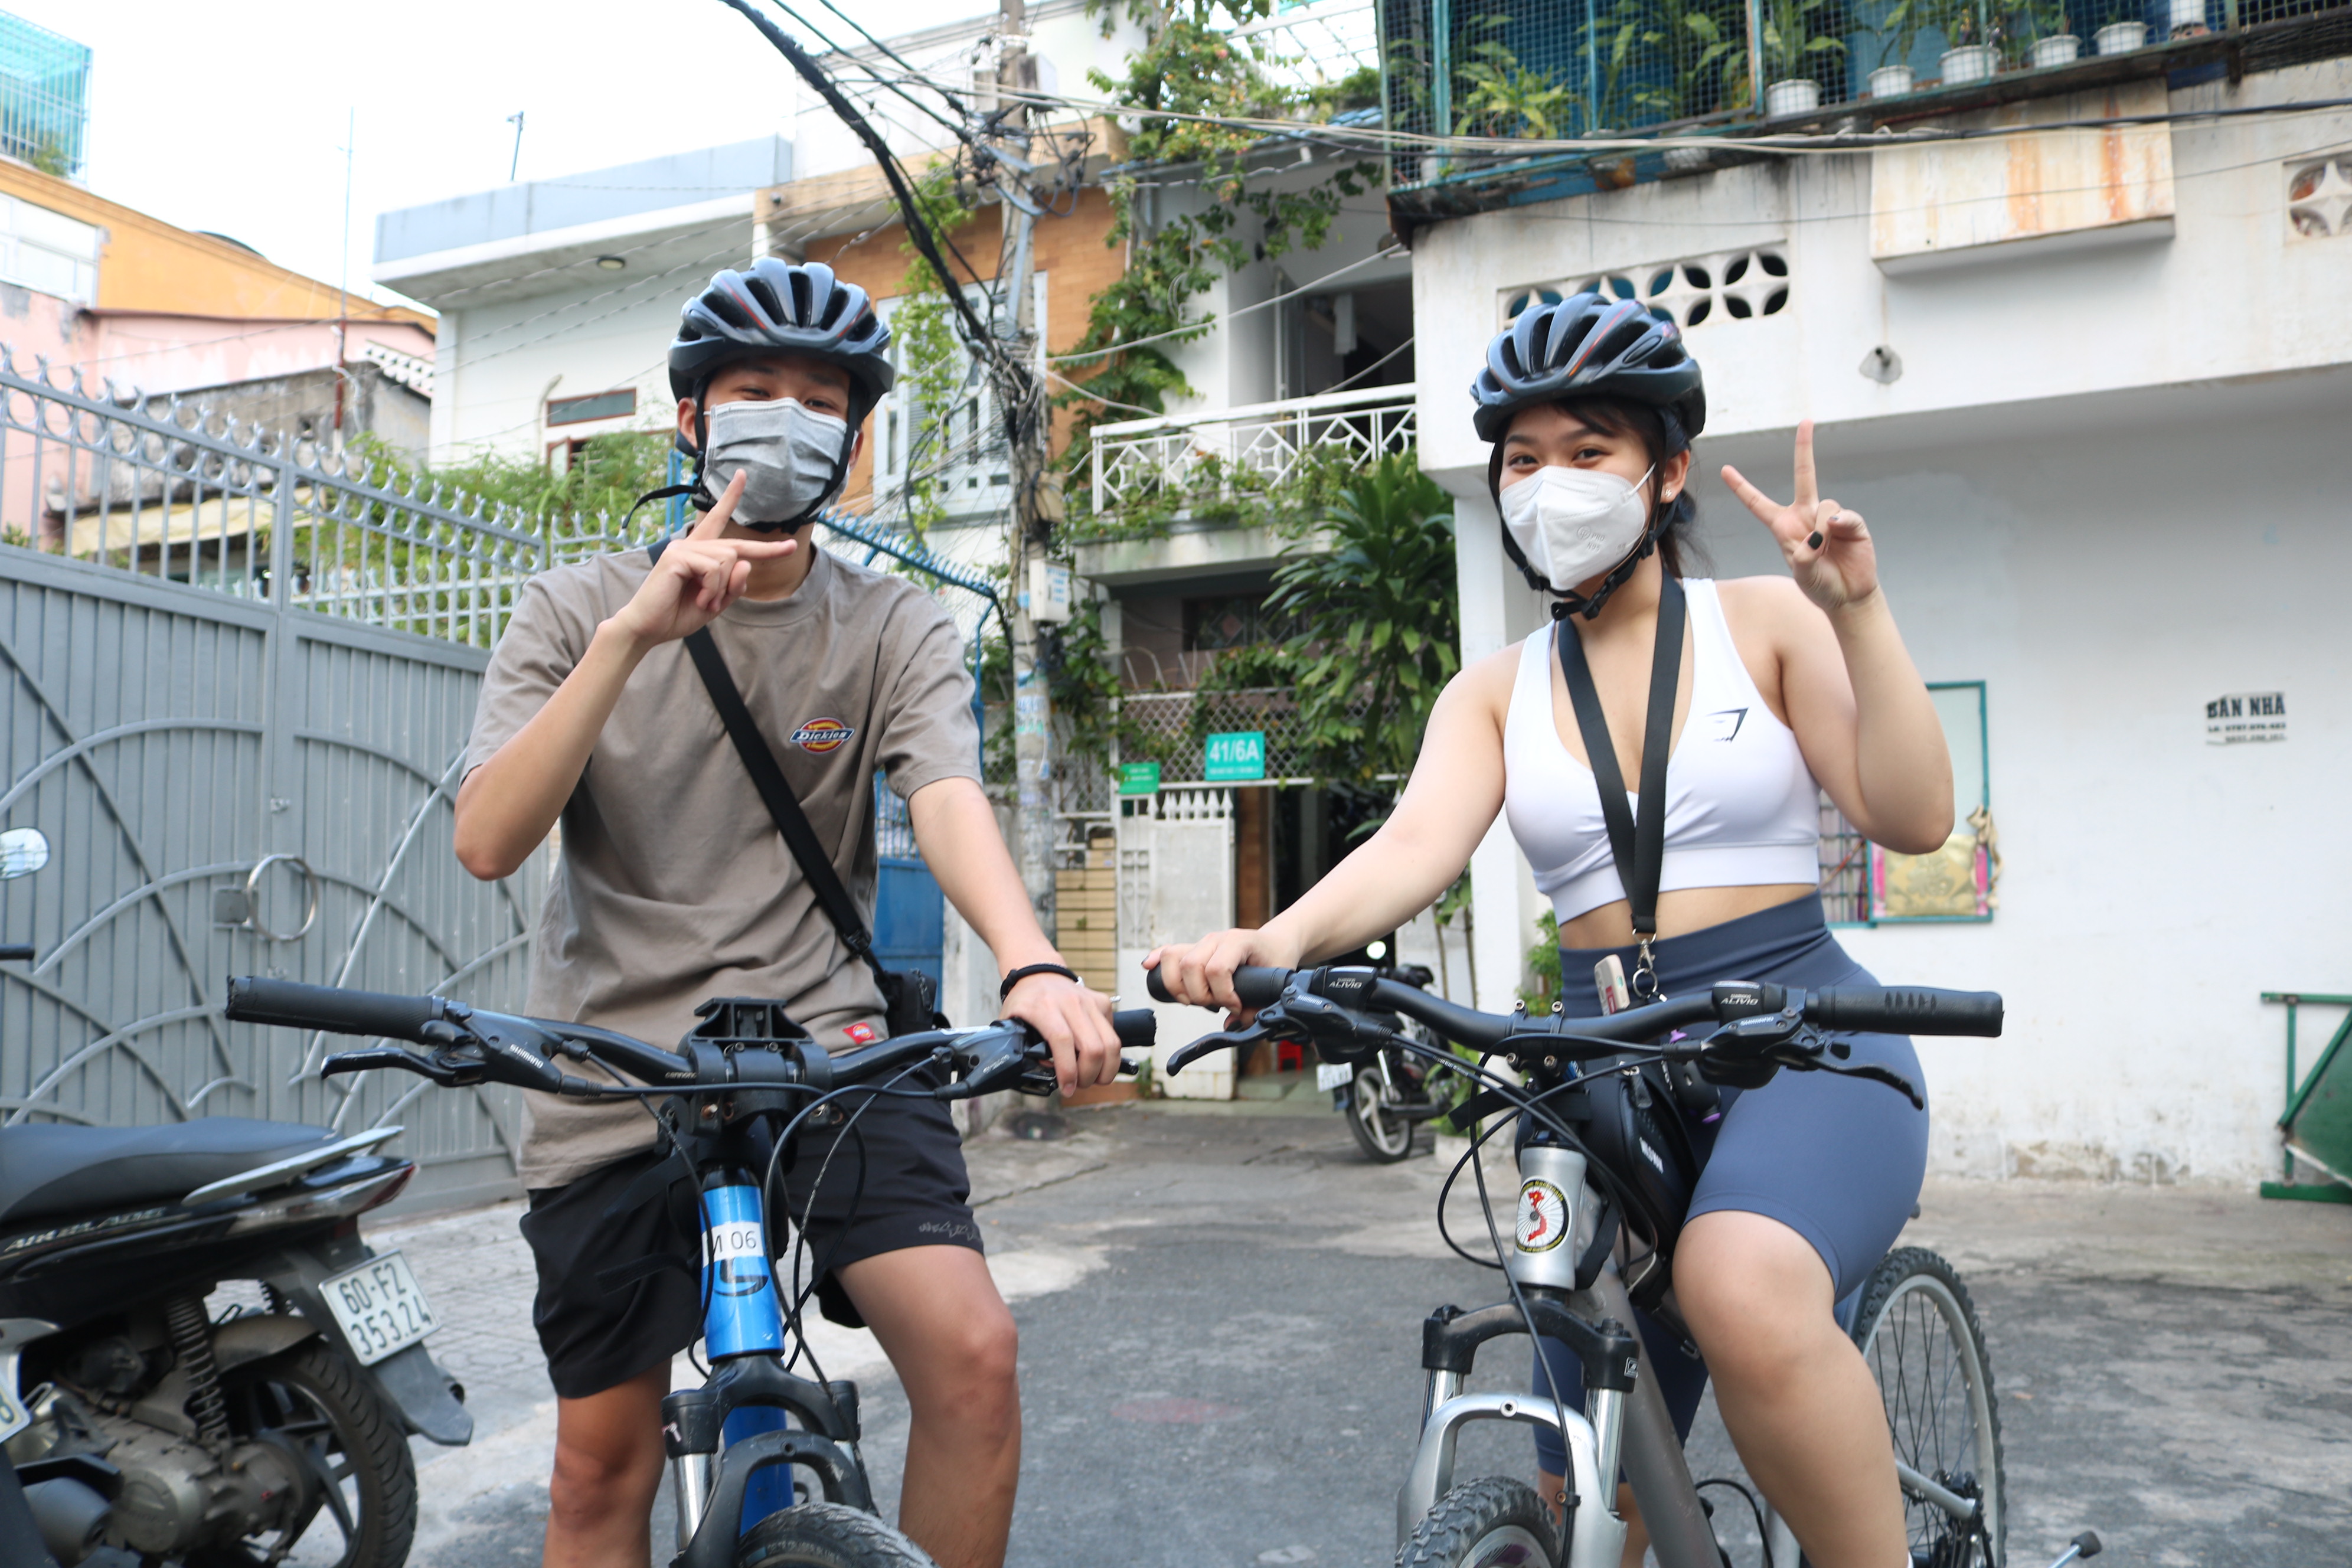 Tuan Anh (left) and Truc Dao take a two-hour trip on rental bikes in Ho Chi Minh City on November 3, 20201. Photo: Hoang An / Tuoi Tre News